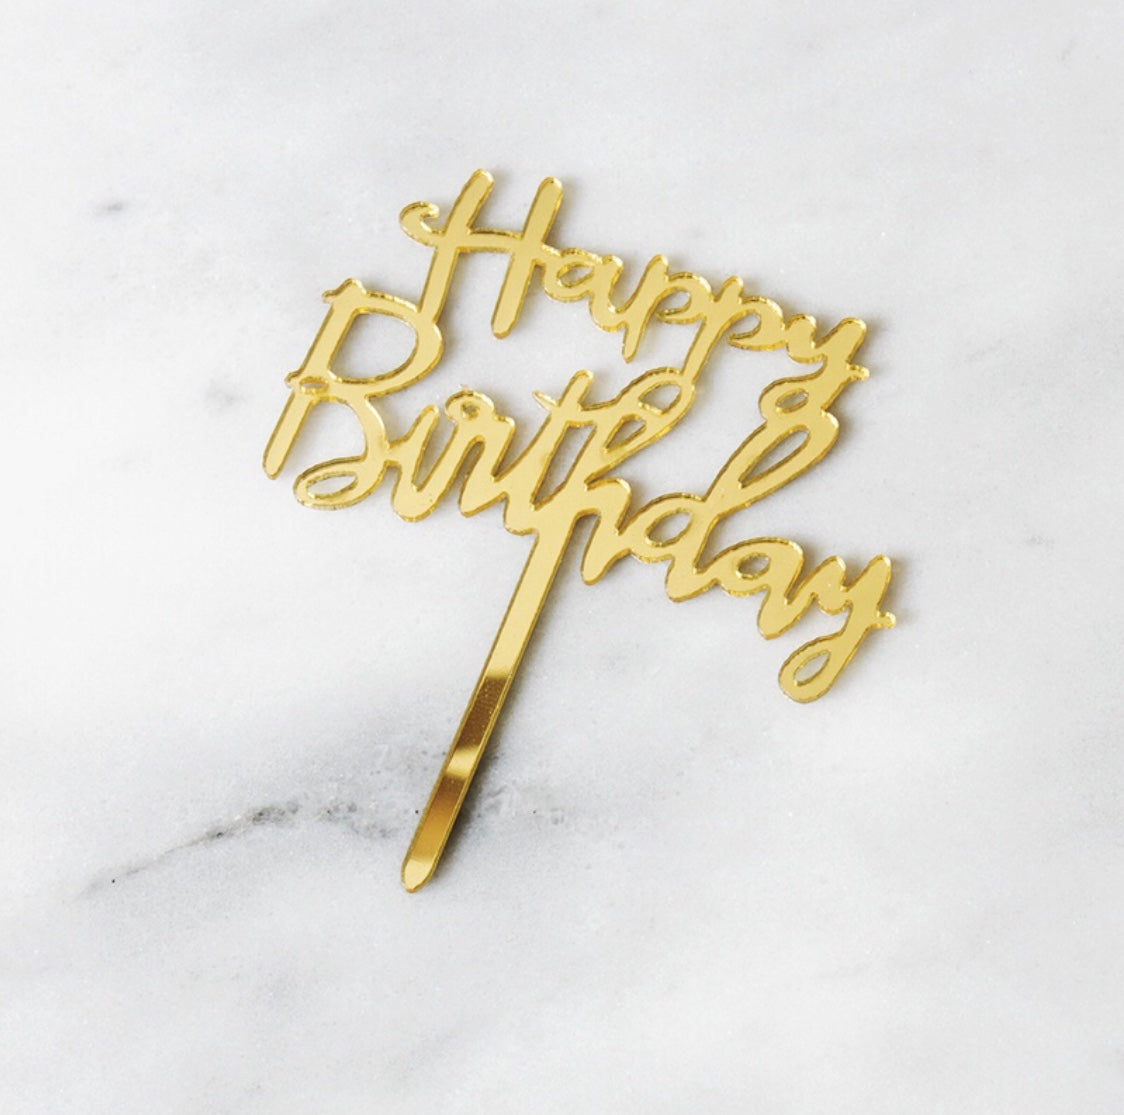 Greetings - Cake Toppers